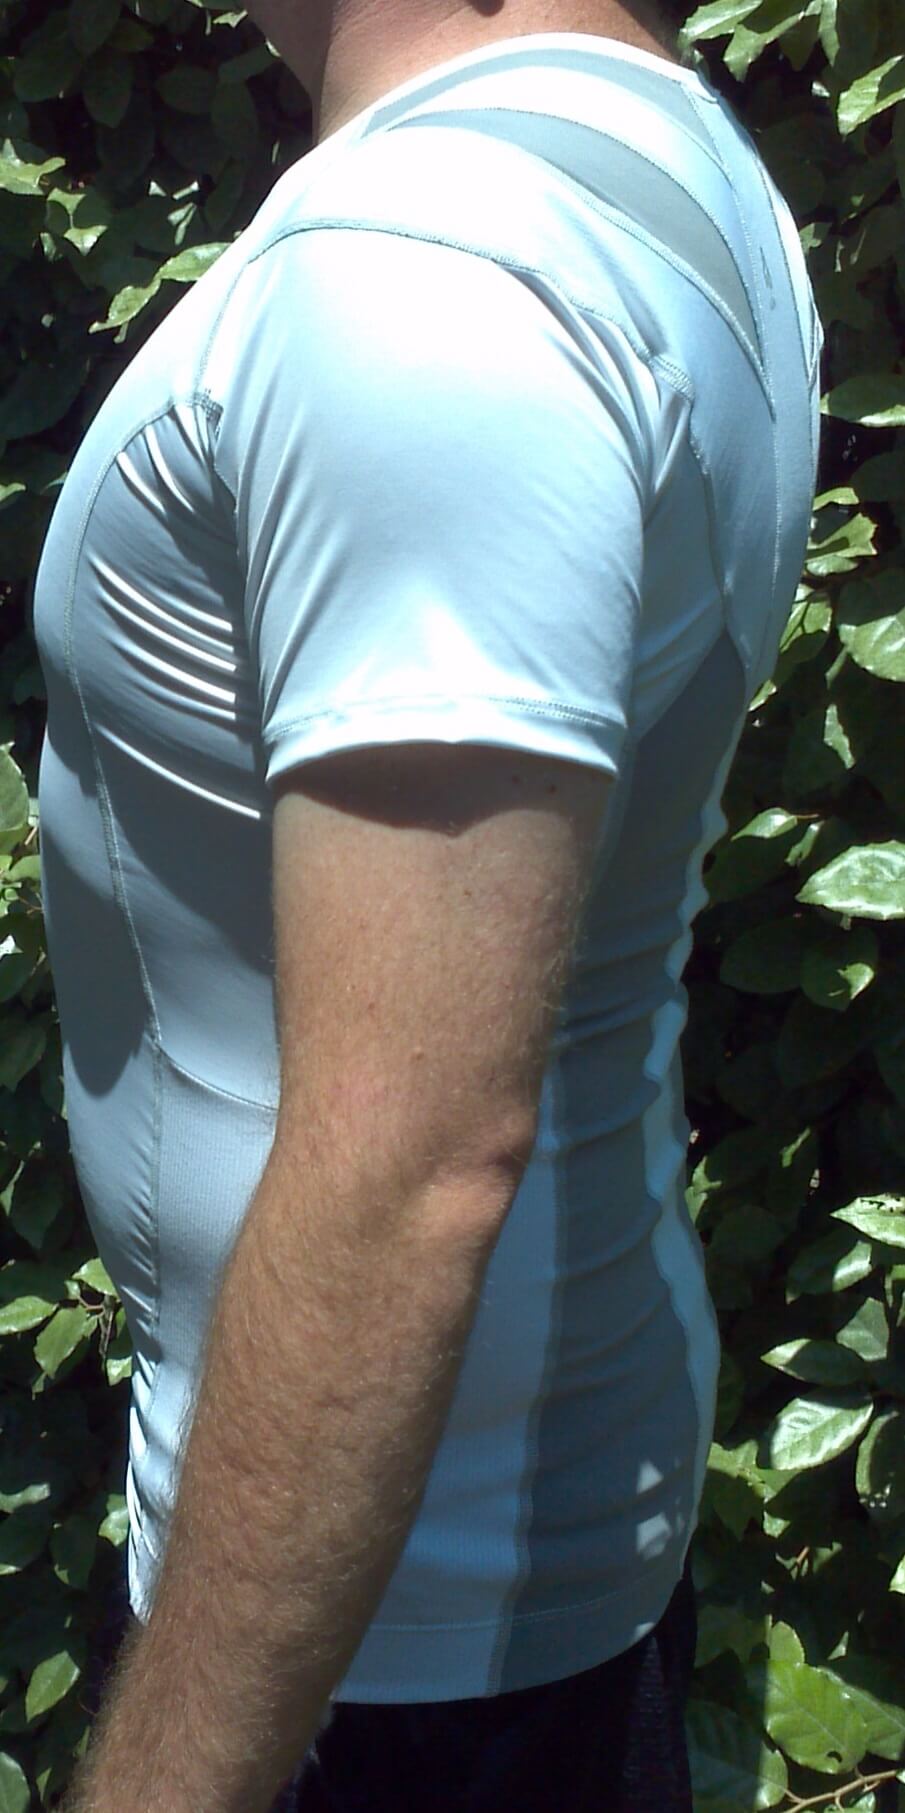 Product review of the Alignmed Posture Shirt 2.0